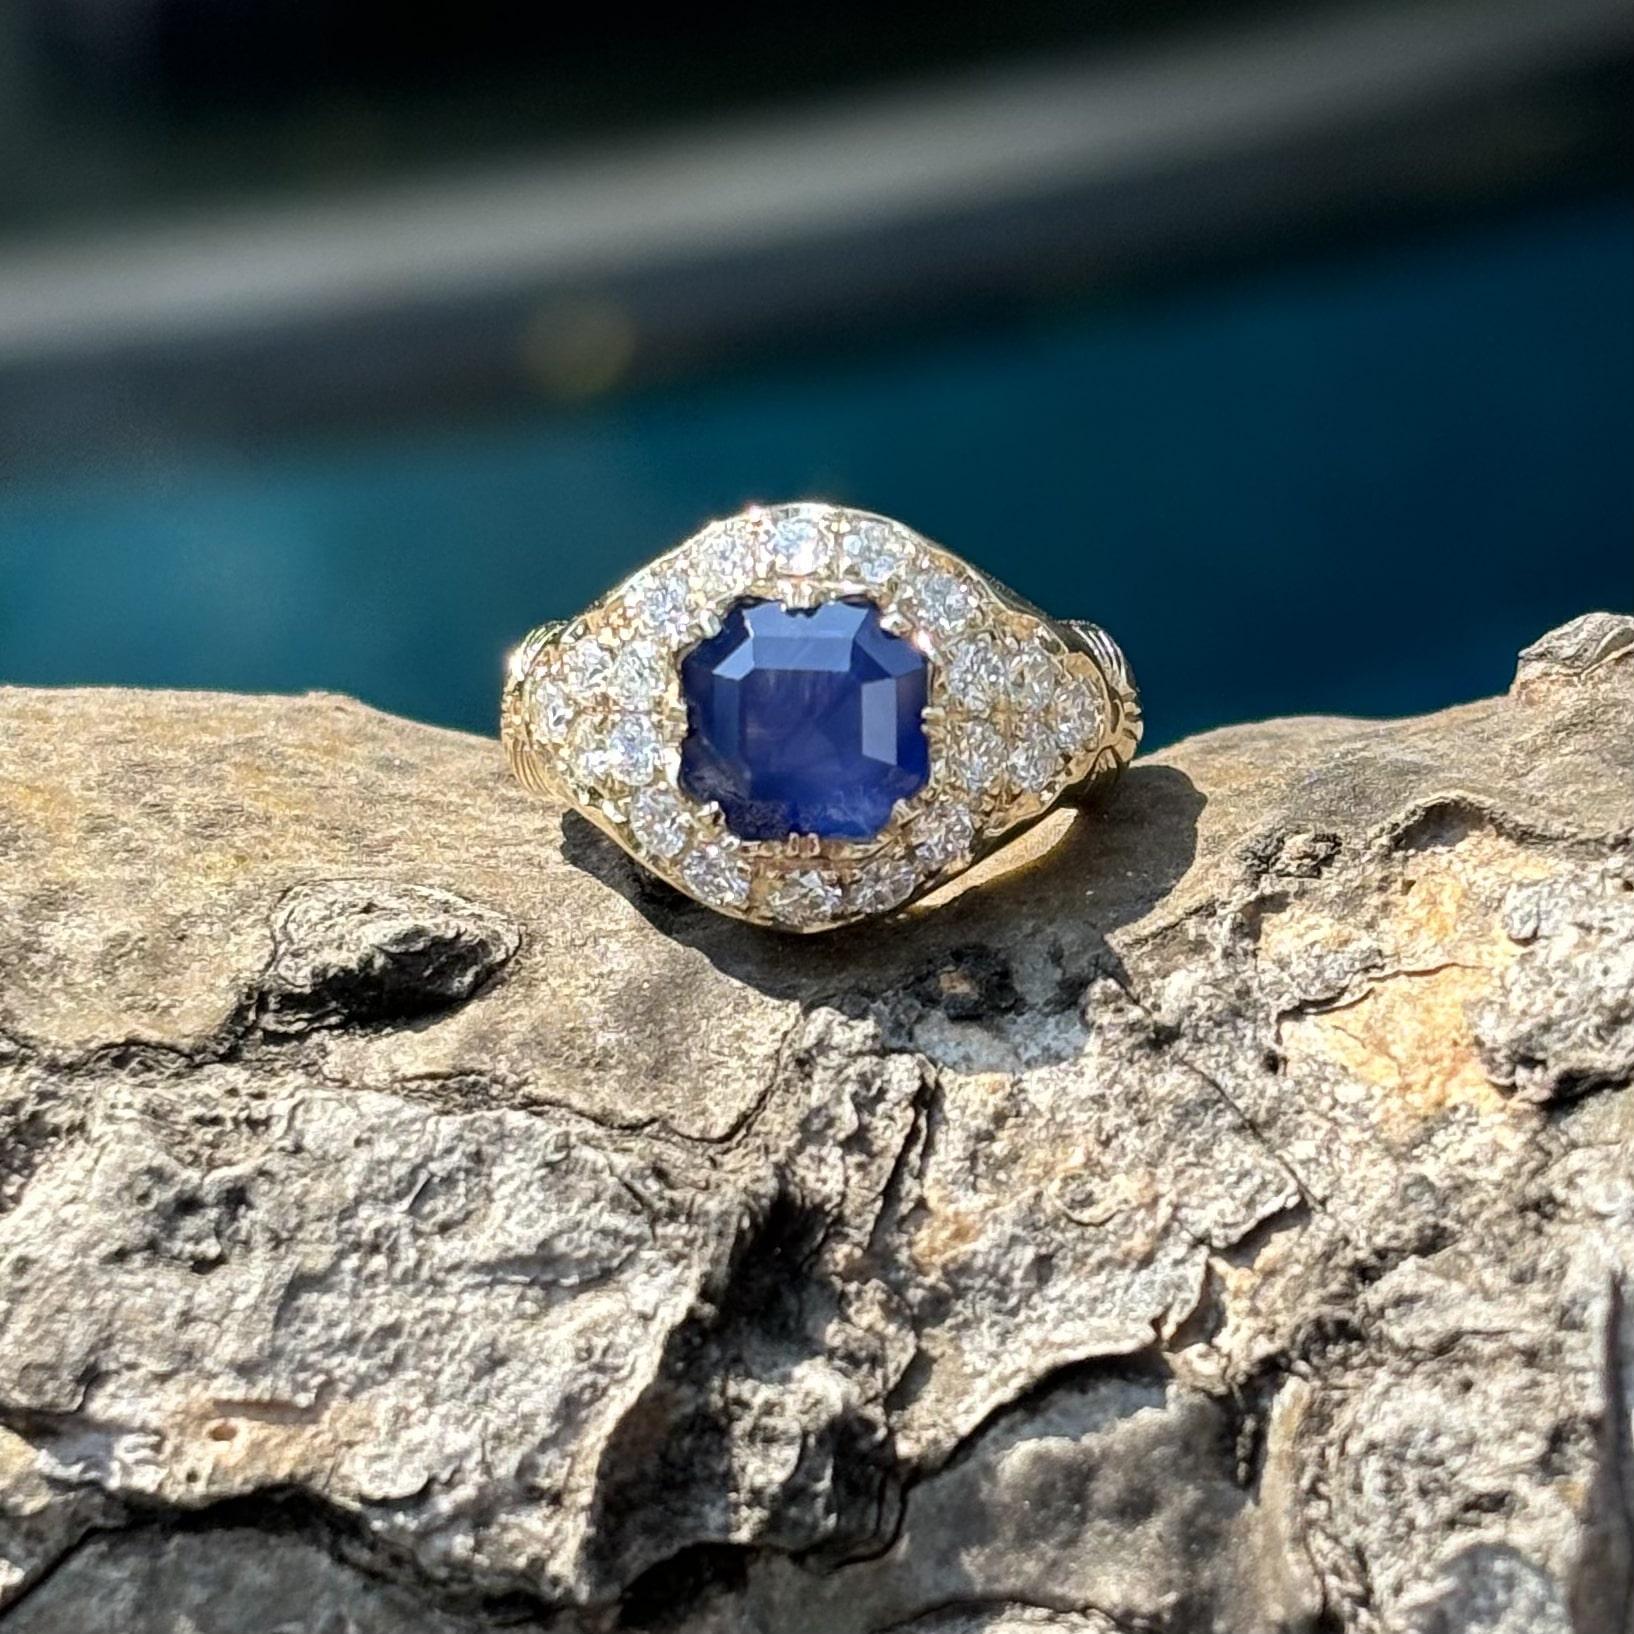 Indulge in the allure of exquisite jewelry with this captivating Ceylon Sapphire ring, a treasure that will leave all vintage jewelry enthusiasts and sapphire lovers delighted. Ceylon Sapphires, known for their extraordinary beauty, are among the